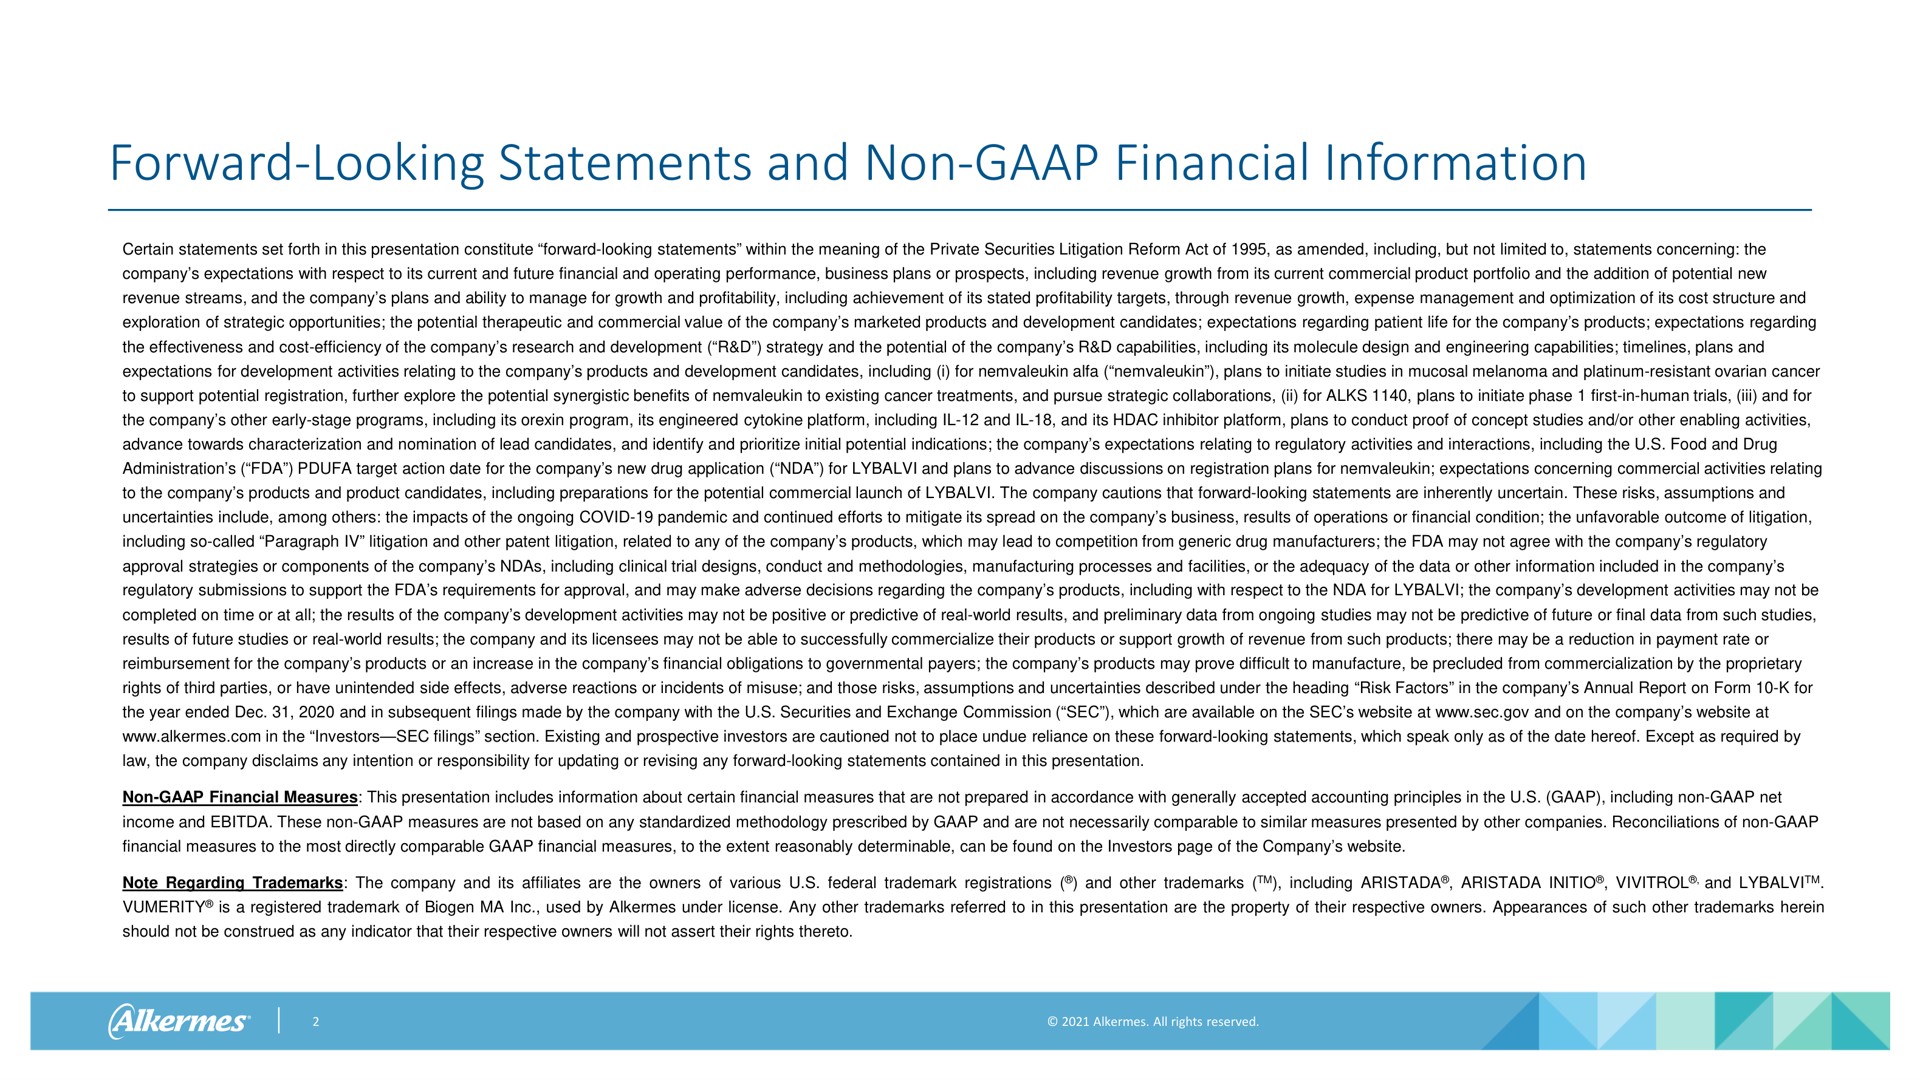 forward looking statements and non financial information certain statements set forth in this presentation constitute forward looking statements within the meaning of the private securities litigation reform act of as amended including but not limited to statements concerning the company expectations with respect to its current and future financial and operating performance business plans or prospects including revenue growth from its current commercial product portfolio and the addition of potential new revenue streams and the company plans and ability to manage for growth and profitability including achievement of its stated profitability targets through revenue growth expense management and optimization of its cost structure and exploration of strategic opportunities the potential therapeutic and commercial value of the company marketed products and development candidates expectations regarding patient life for the company products expectations regarding the effectiveness and cost efficiency of the company research and development strategy and the potential of the company capabilities including its molecule design and engineering capabilities plans and expectations for development activities relating to the company products and development candidates including i for alfa plans to initiate studies in mucosal melanoma and platinum resistant ovarian cancer to support potential registration further explore the potential synergistic benefits of to existing cancer treatments and pursue strategic collaborations for plans to initiate phase first in human trials and for the company other early stage programs including its program its engineered platform including and and its inhibitor platform plans to conduct proof of concept studies and or other enabling activities advance towards characterization and nomination of lead candidates and identify and initial potential indications the company expectations relating to regulatory activities and interactions including the food and drug administration target action date for the company new drug application for and plans to advance discussions on registration plans for expectations concerning commercial activities relating to the company products and product candidates including preparations for the potential commercial launch of the company cautions that forward looking statements are inherently uncertain these risks assumptions and uncertainties include among the impacts of the ongoing covid pandemic and continued efforts to mitigate its spread on the company business results of operations or financial condition the unfavorable outcome of litigation including so called paragraph litigation and other patent litigation related to any of the company products which may lead to competition from generic drug manufacturers the may not agree with the company regulatory approval strategies or components of the company including clinical trial designs conduct and methodologies manufacturing processes and facilities or the adequacy of the data or other information included in the company regulatory submissions to support the requirements for approval and may make adverse decisions regarding the company products including with respect to the for the company development activities may not be completed on time or at all the results of the company development activities may not be positive or predictive of real world results and preliminary data from ongoing studies may not be predictive of future or final data from such studies results of future studies or real world results the company and its licensees may not be able to successfully commercialize their products or support growth of revenue from such products there may be a reduction in payment rate or reimbursement for the company products or an increase in the company financial obligations to governmental payers the company products may prove difficult to manufacture be precluded from commercialization by the proprietary rights of third parties or have unintended side effects adverse reactions or incidents of misuse and those risks assumptions and uncertainties described under the heading risk factors in the company annual report on form for the year ended and in subsequent filings made by the company with the securities and exchange commission sec which are available on the sec at sec and on the company at alkermes in the investors sec filings section existing and prospective investors are cautioned not to place undue reliance on these forward looking statements which speak only as of the date hereof except as required by law the company disclaims any intention or responsibility for updating or revising any forward looking statements contained in this presentation non financial measures this presentation includes information about certain financial measures that are not prepared in accordance with generally accepted accounting principles in the including non net income and these non measures are not based on any standardized methodology prescribed by and are not necessarily comparable to similar measures presented by other companies reconciliations of non financial measures to the most directly comparable financial measures to the extent reasonably determinable can be found on the investors page of the company note regarding the company and its affiliates are the owners of various federal registrations and other including and is a registered of biogen used by alkermes under license any other referred to in this presentation are the property of their respective owners appearances of such other herein should not be construed as any indicator that their respective owners will not assert their rights thereto | Alkermes